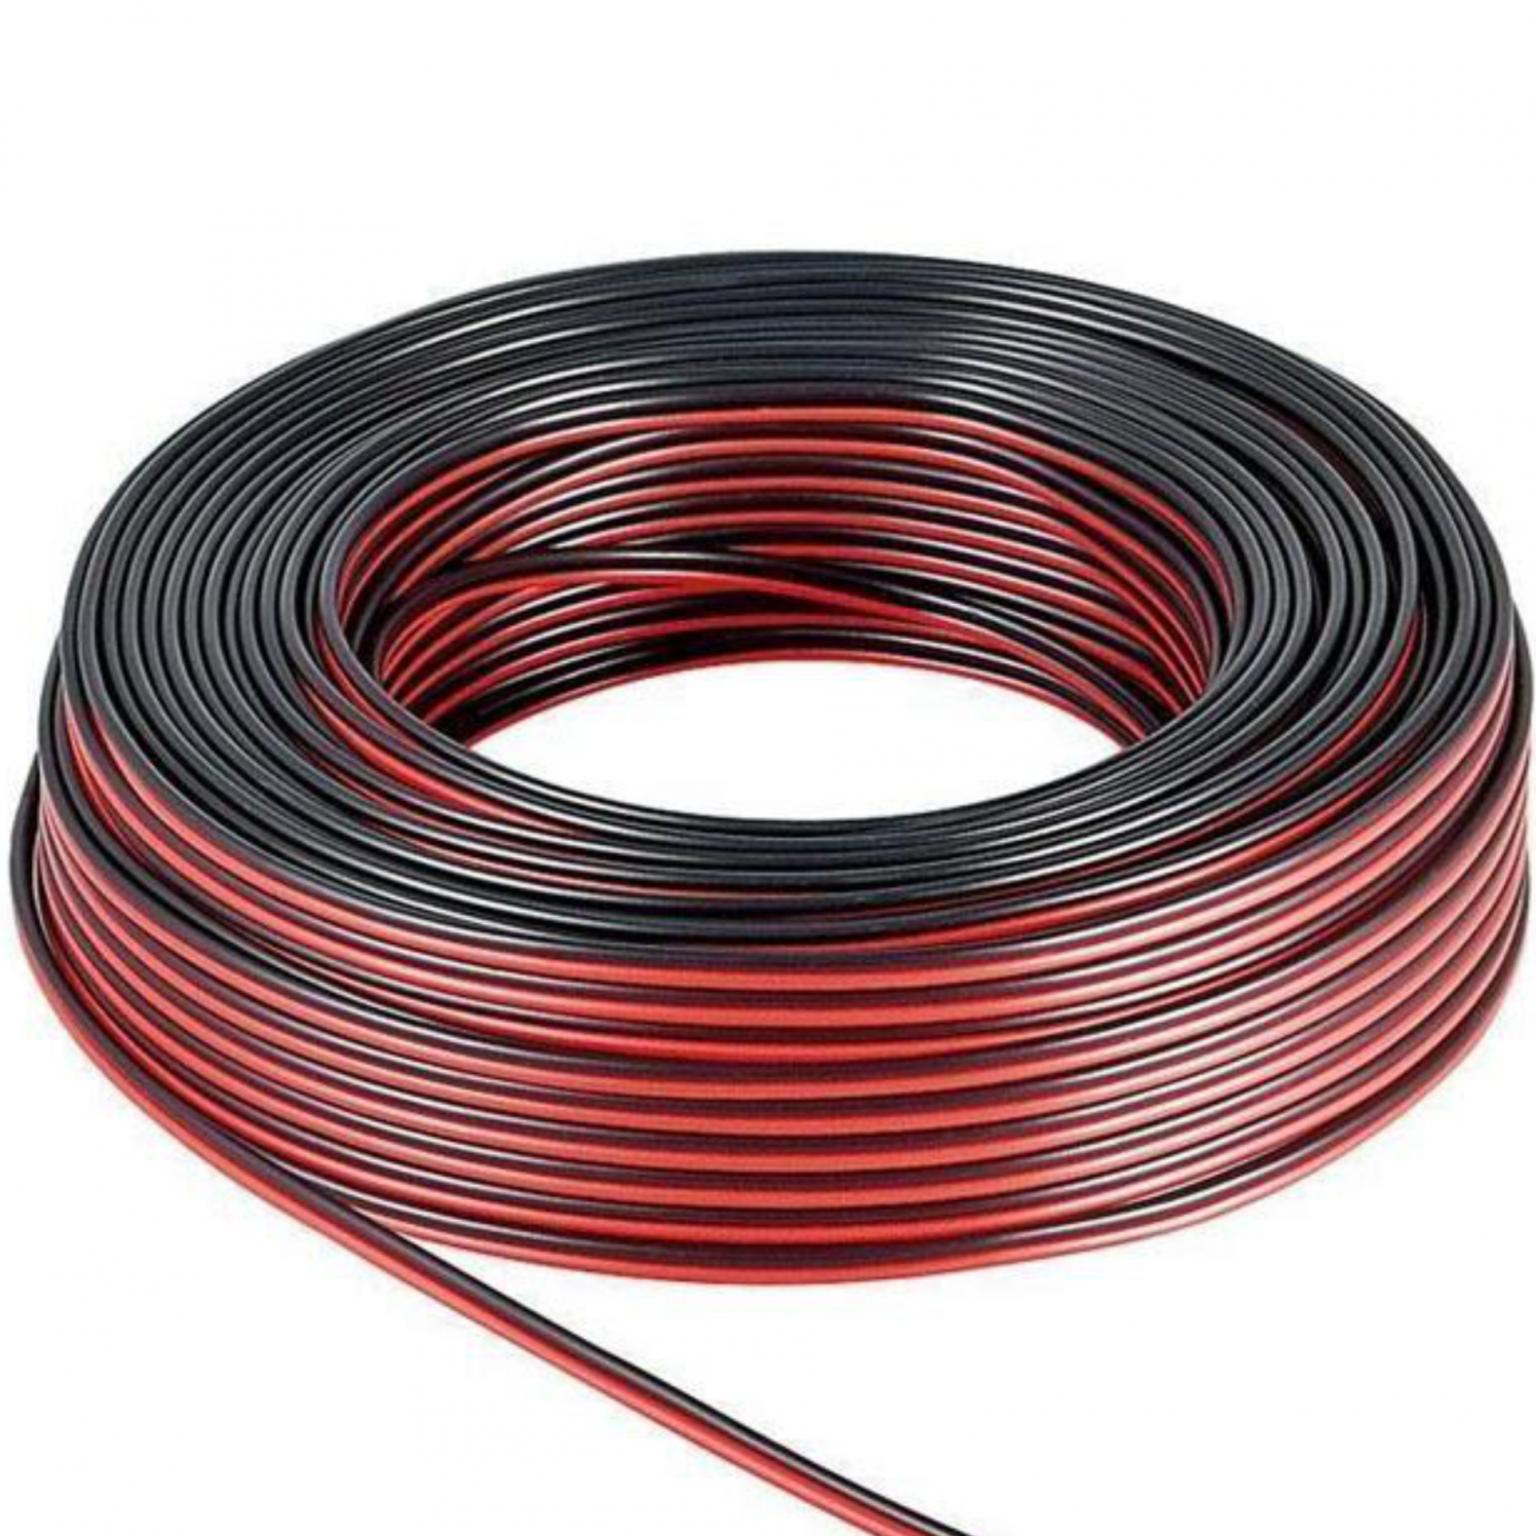 Image of Loudspeaker cable red/black CCA 50 m roll, cable diameter 2 x 2,5 mm?